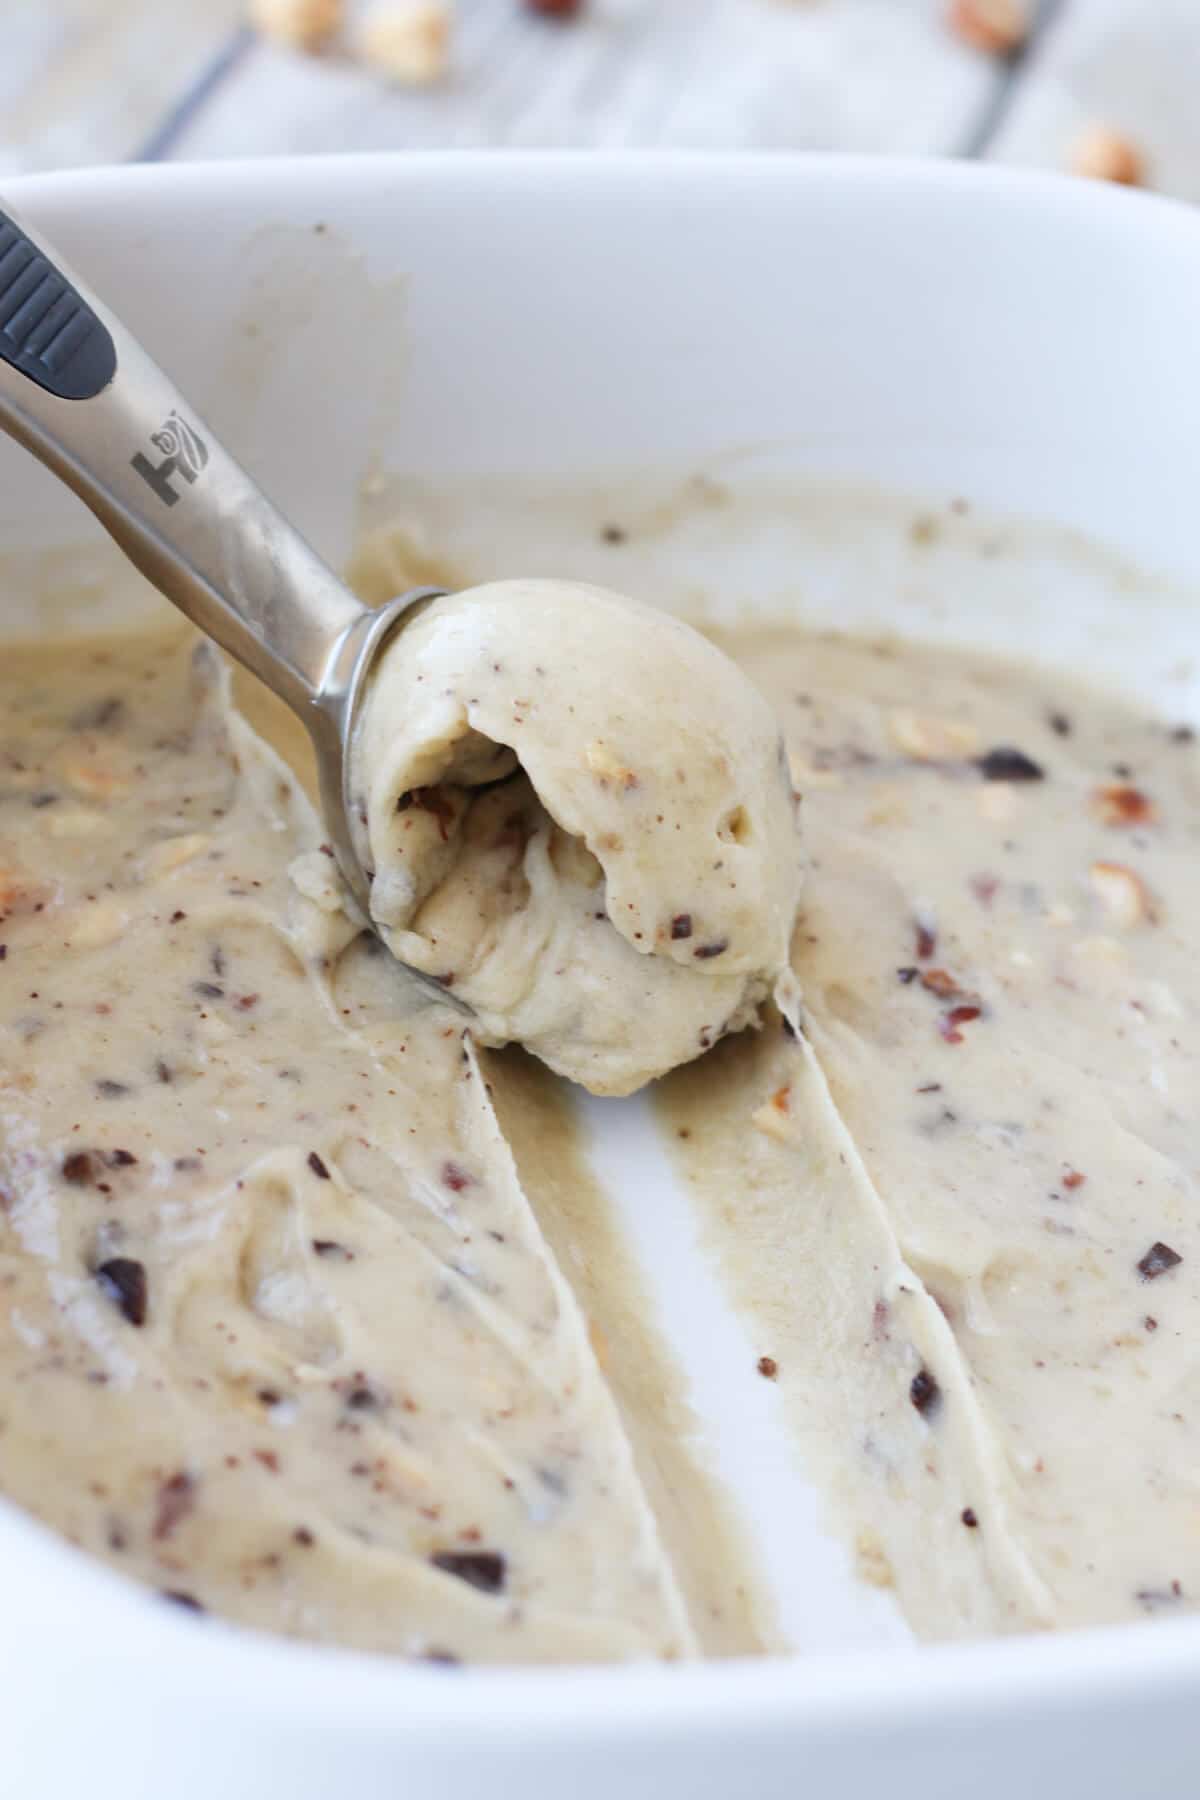 spoon scooping vegan banana nutella ice cream from a bowl